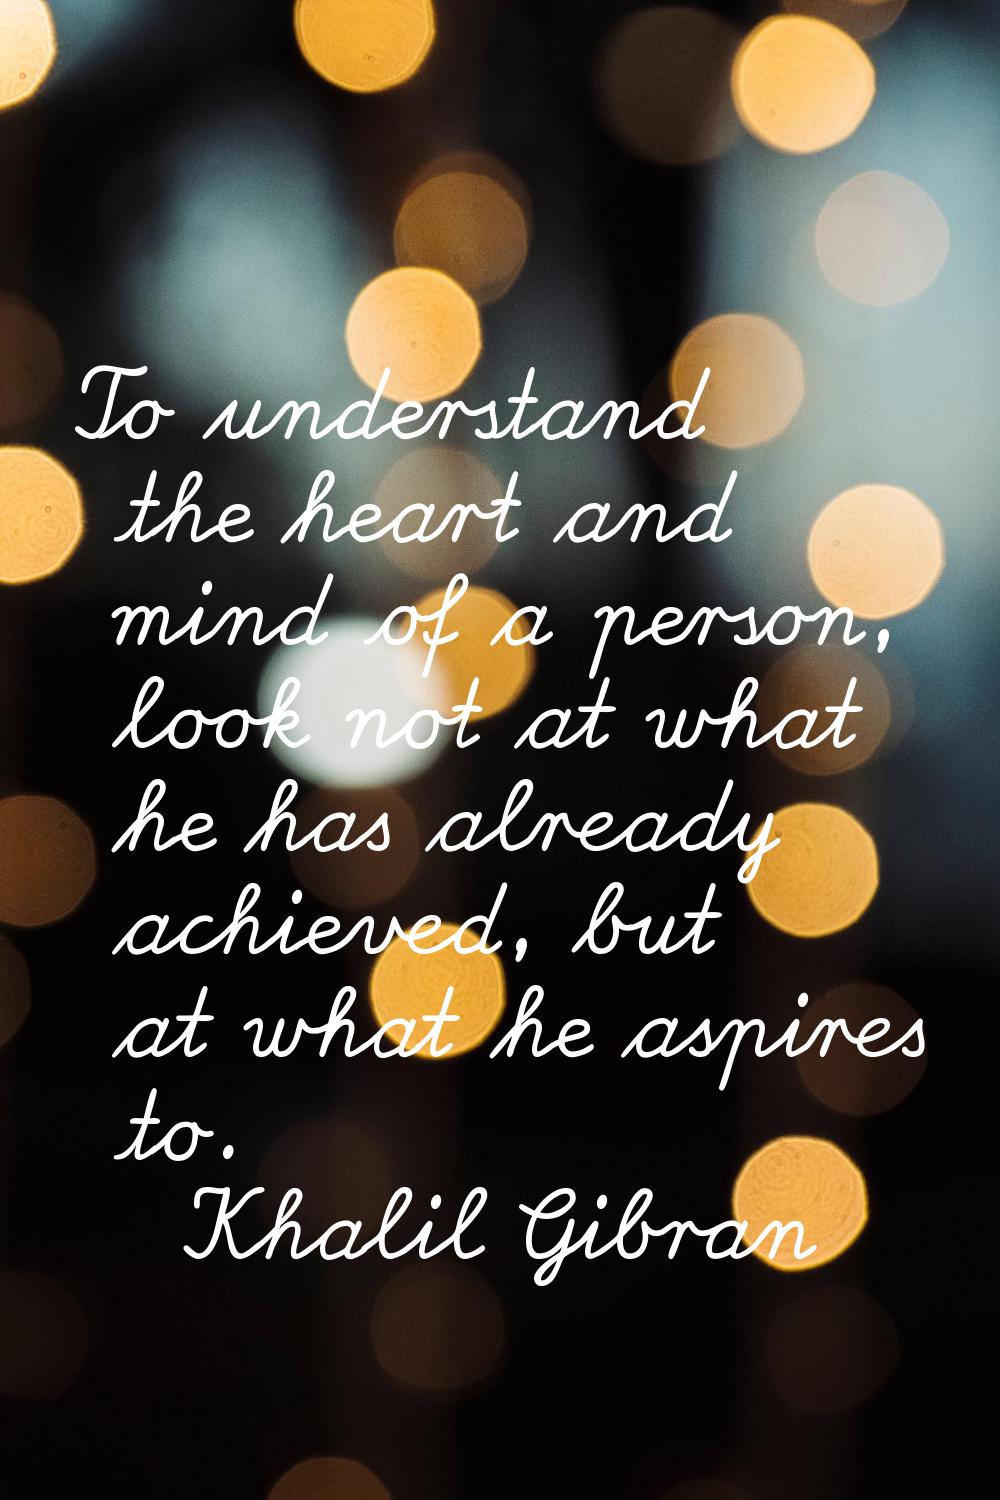 To understand the heart and mind of a person, look not at what he has already achieved, but at what